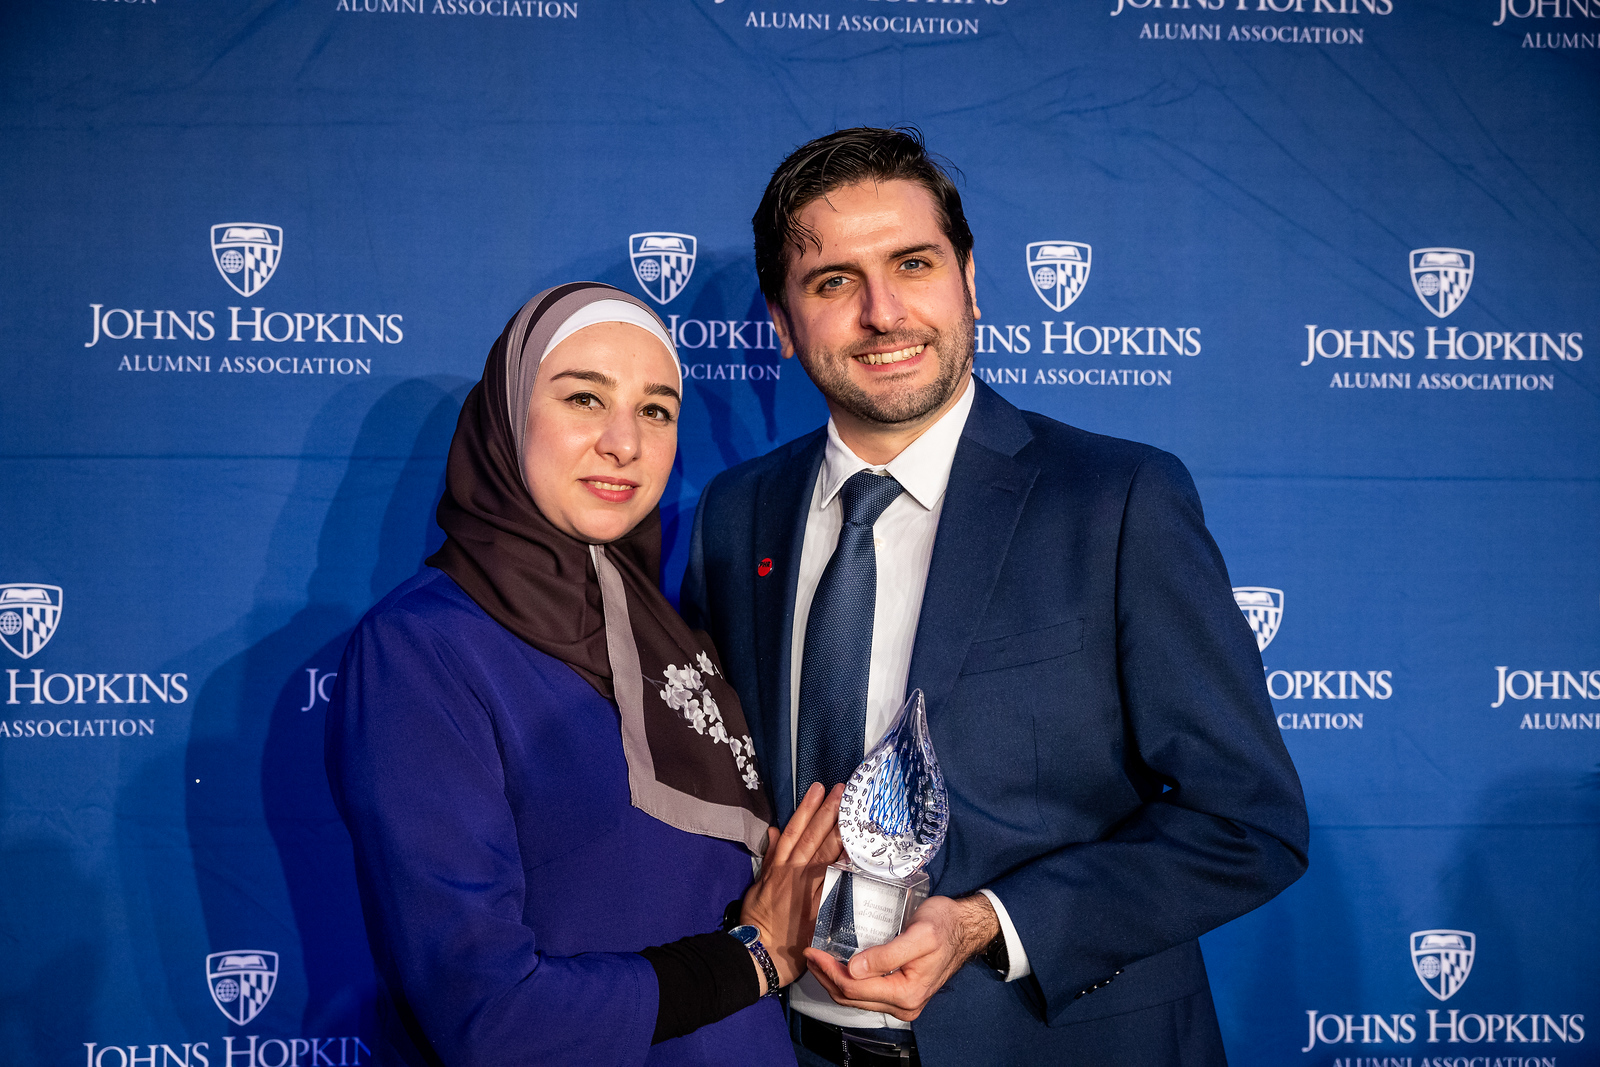 two people standing, one holding a glass award